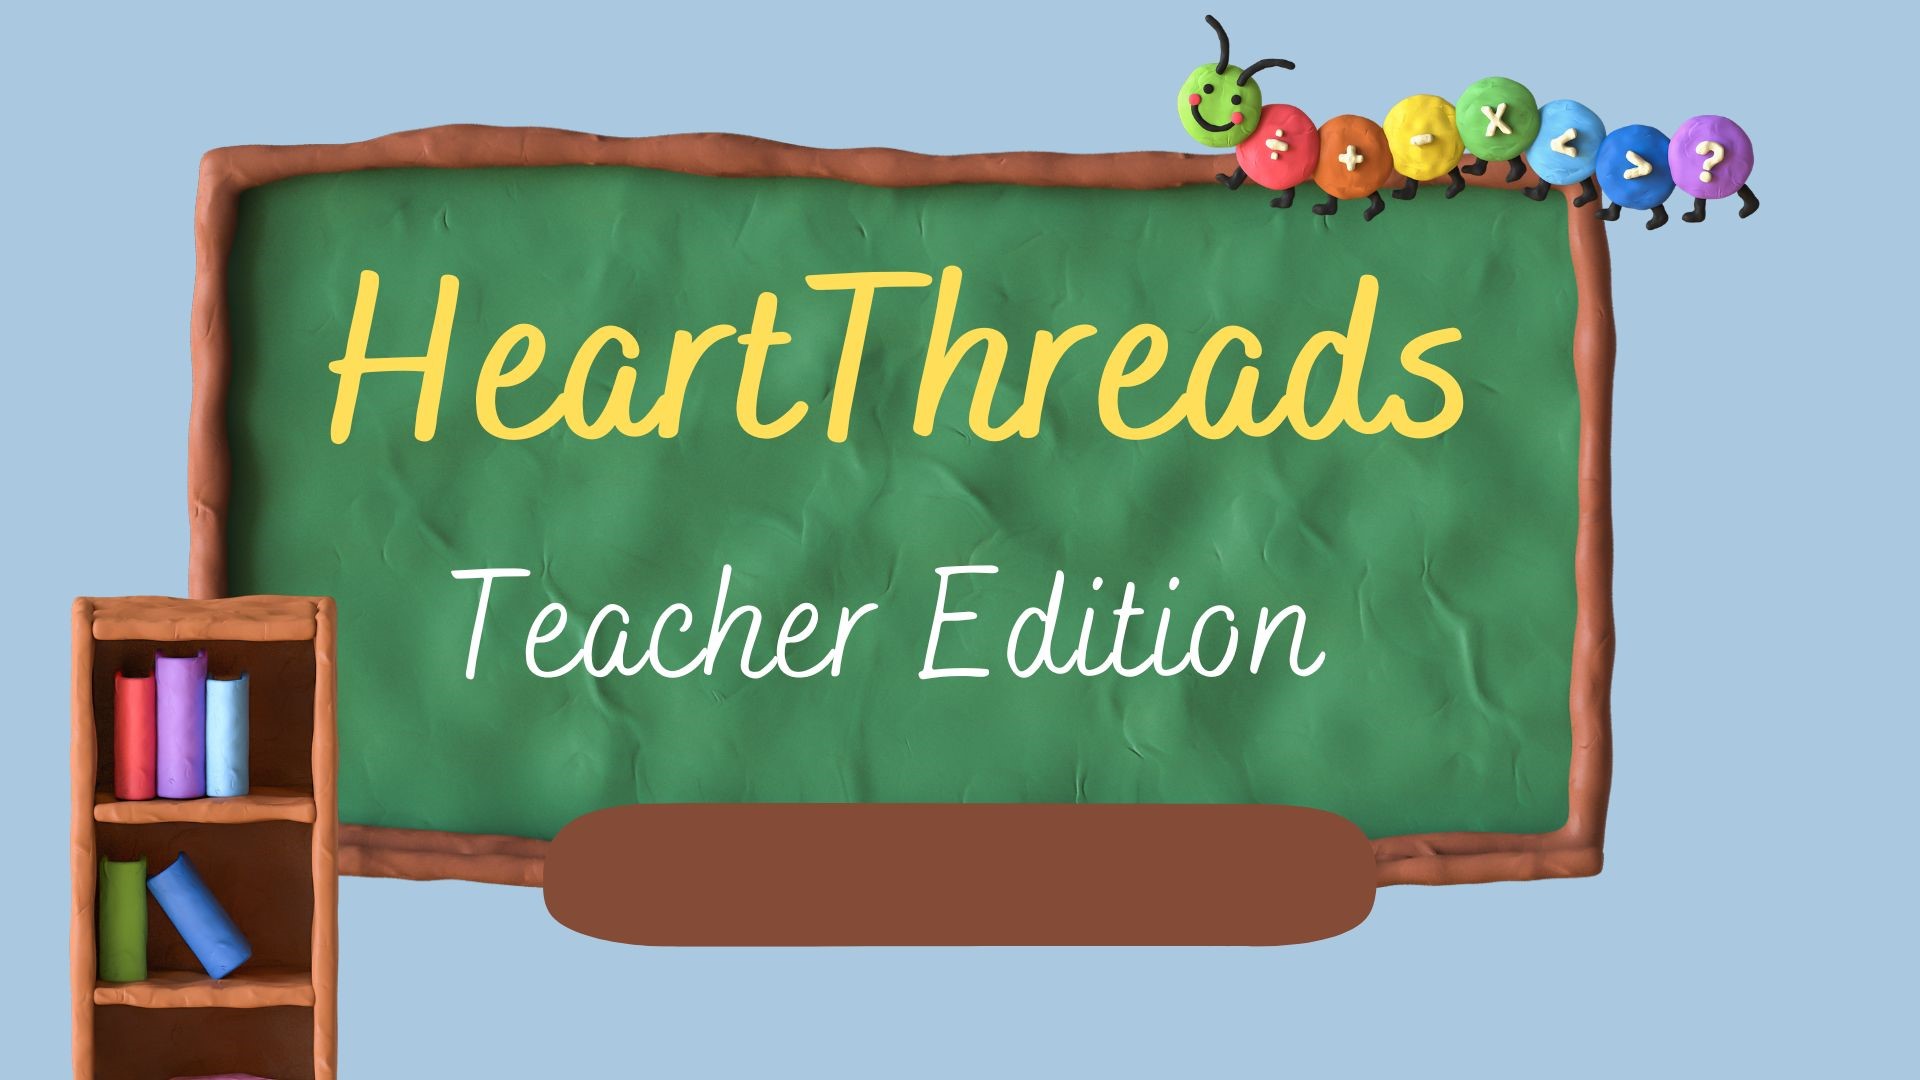 A collection of heartwarming stories honoring teachers across the US who are going above and beyond for their students.